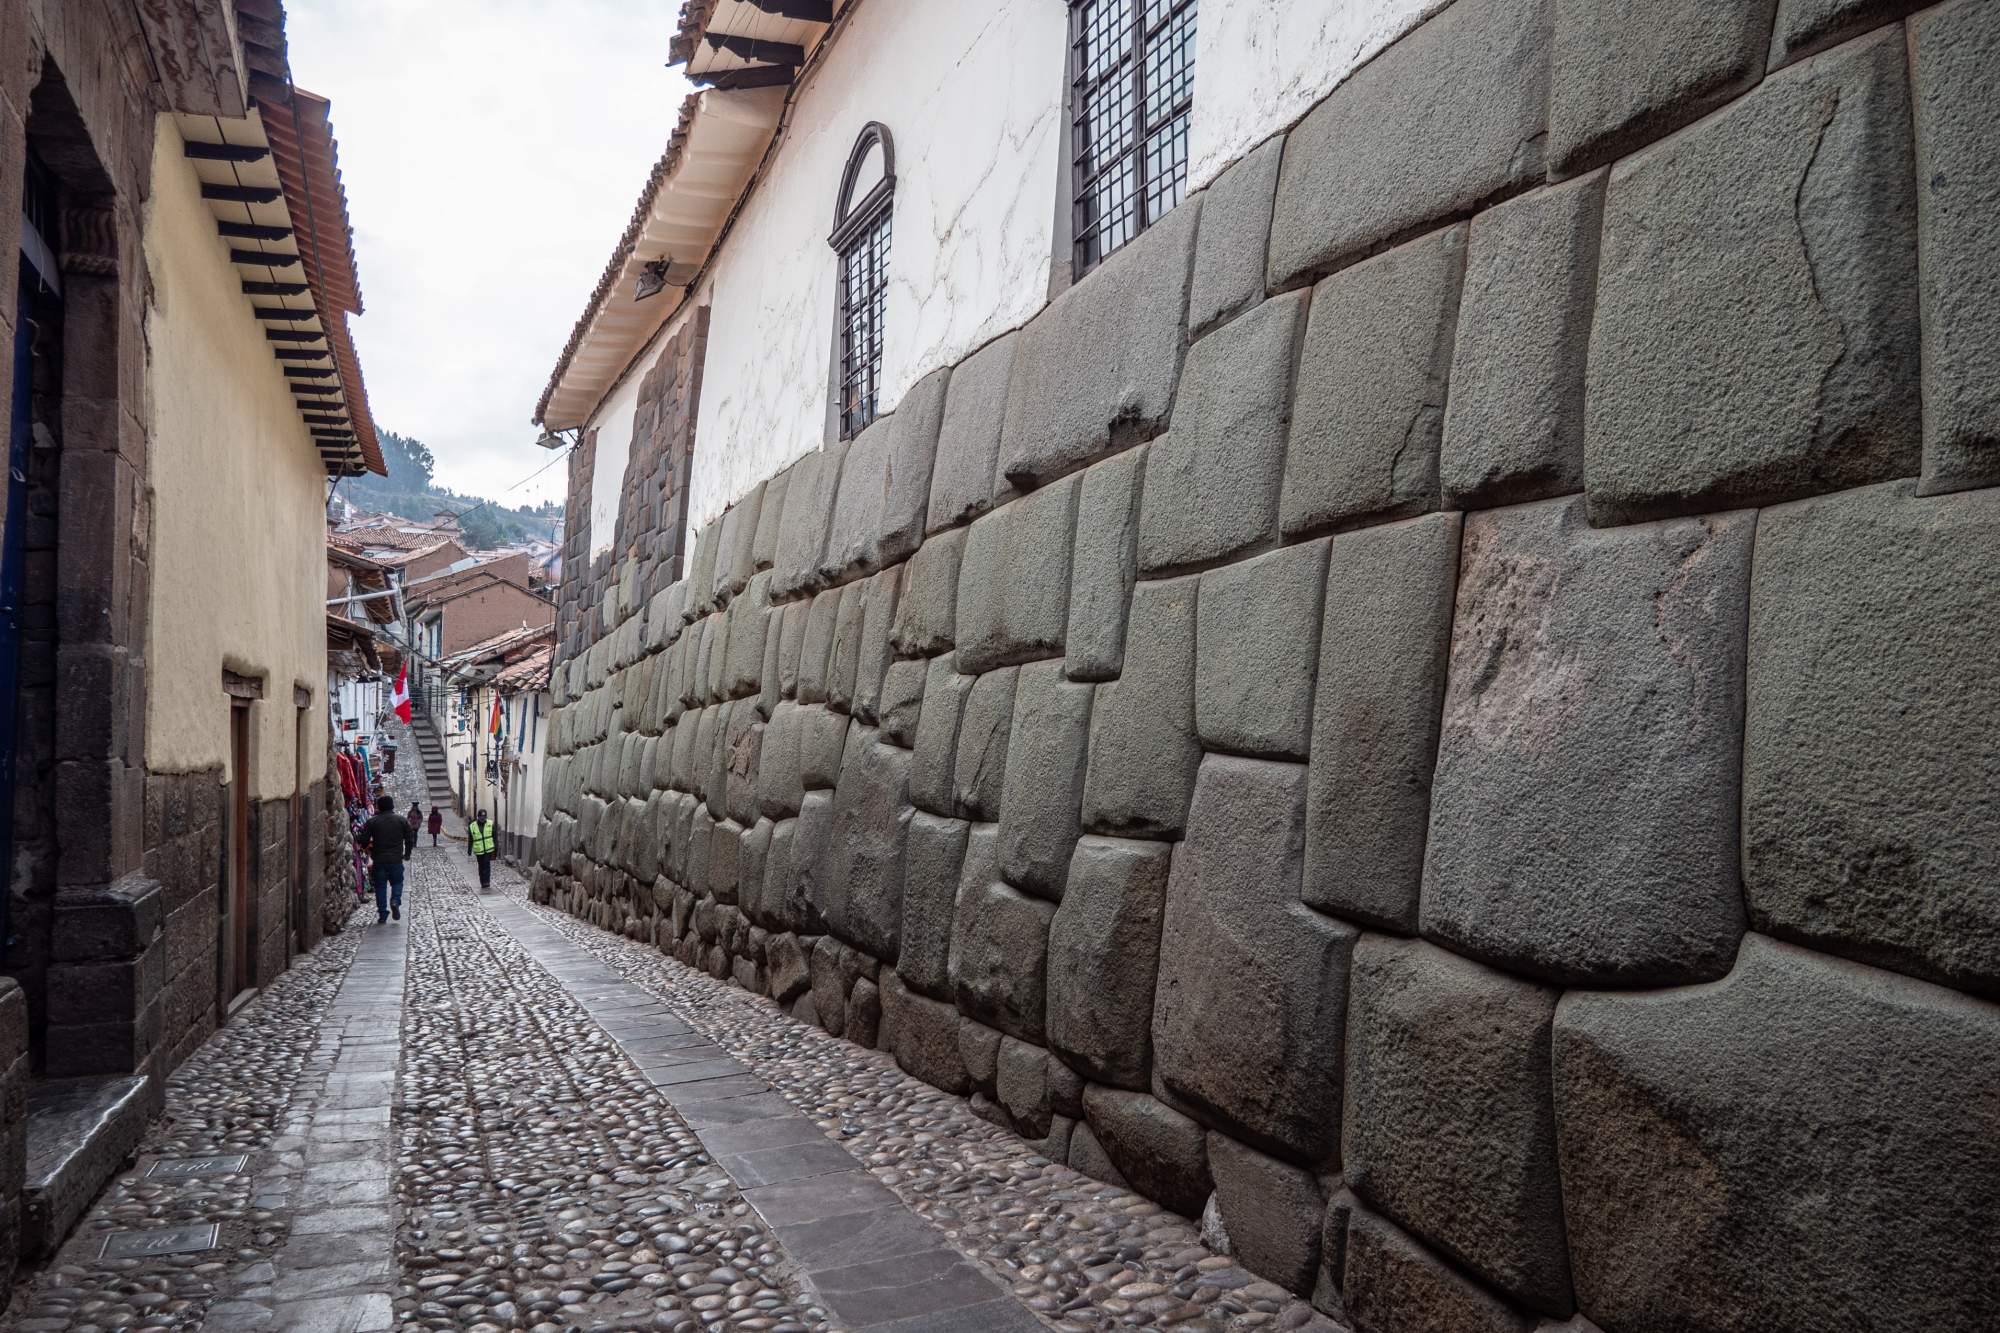 Street in Cusco showing Incan stone foundation